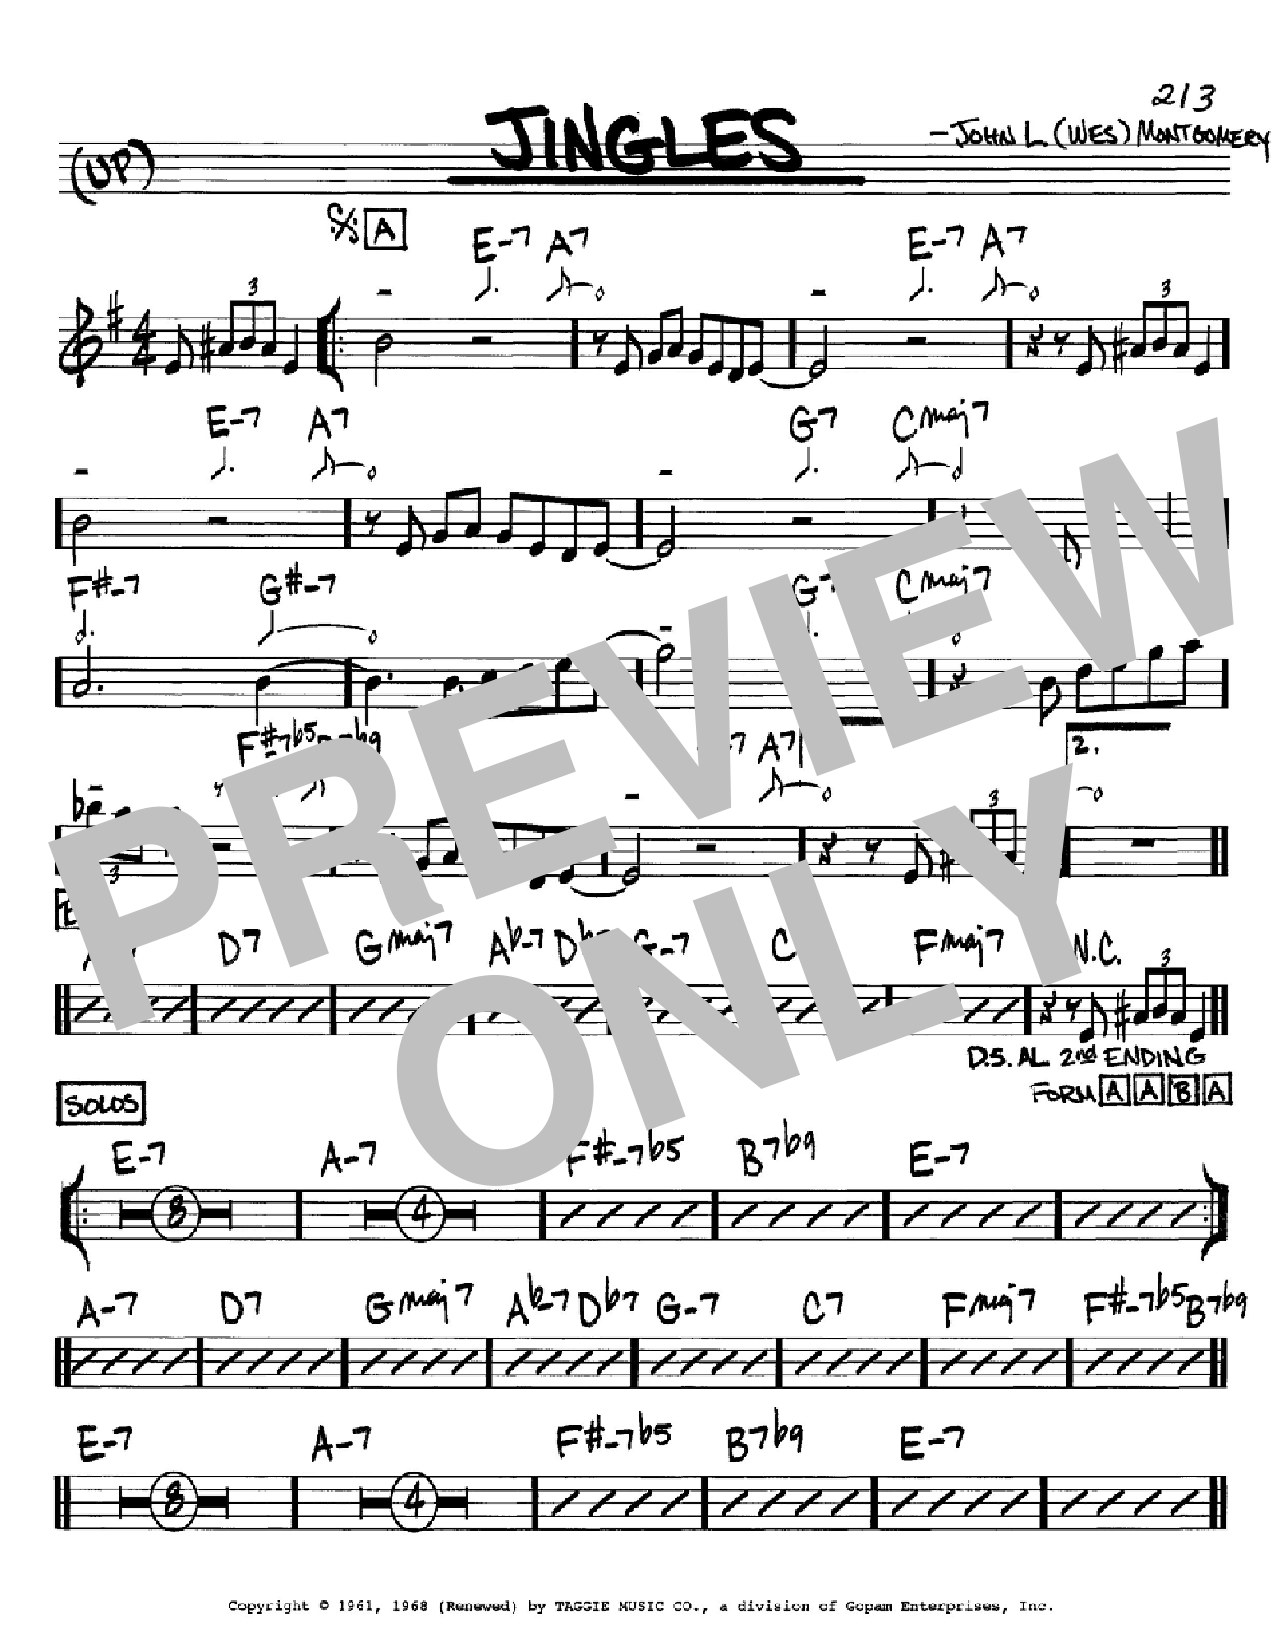 Wes Montgomery Jingles sheet music notes and chords. Download Printable PDF.